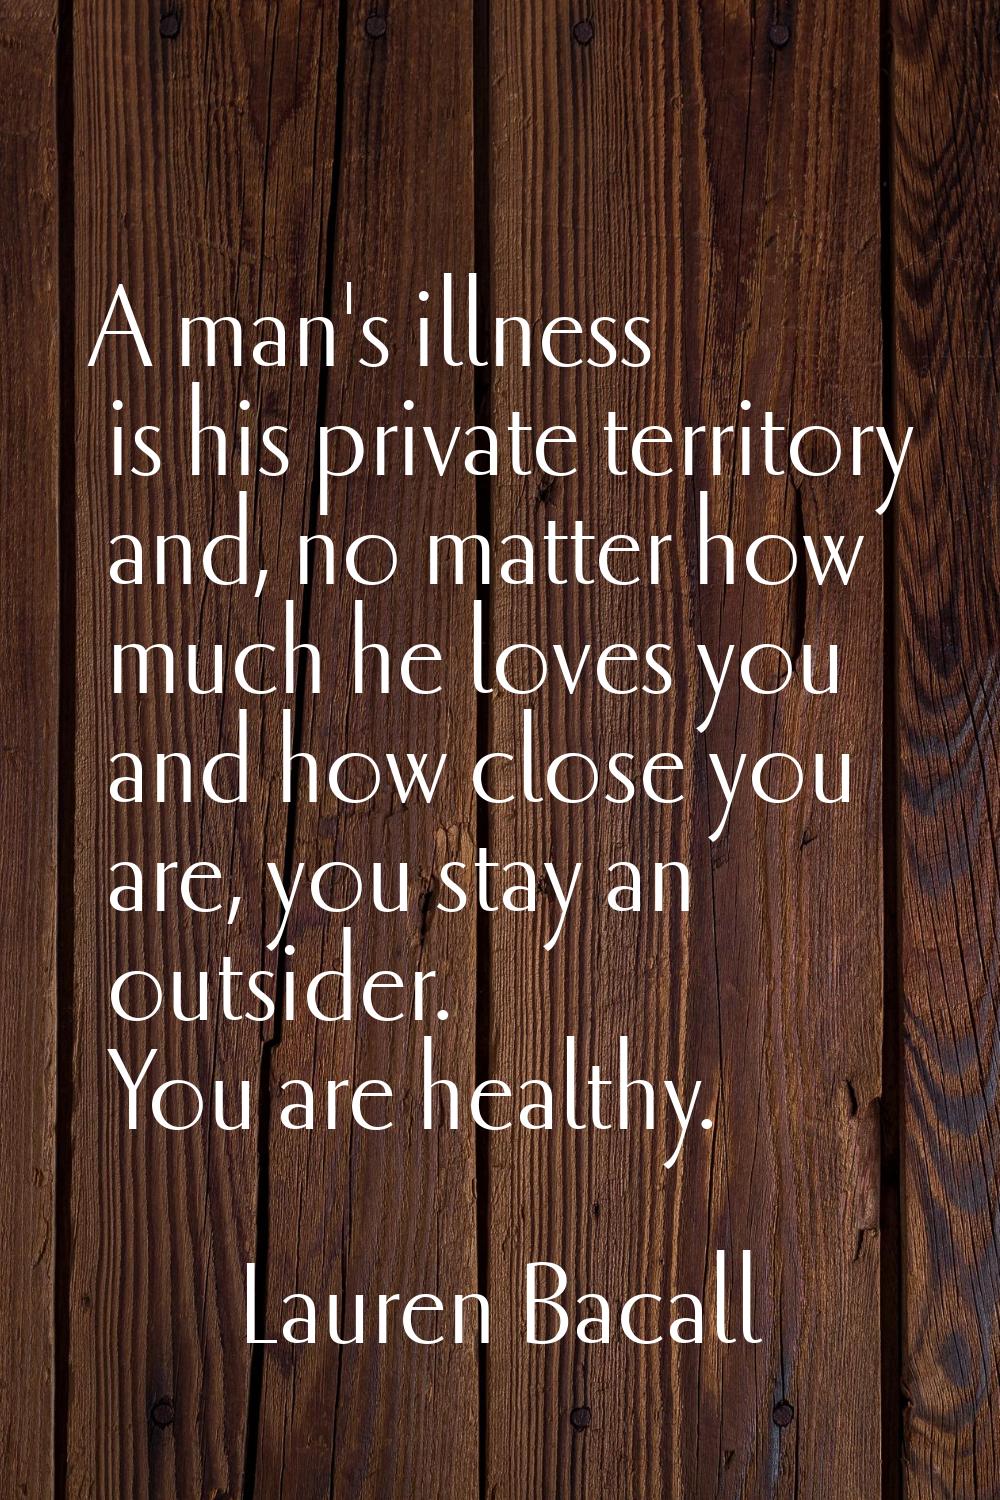 A man's illness is his private territory and, no matter how much he loves you and how close you are